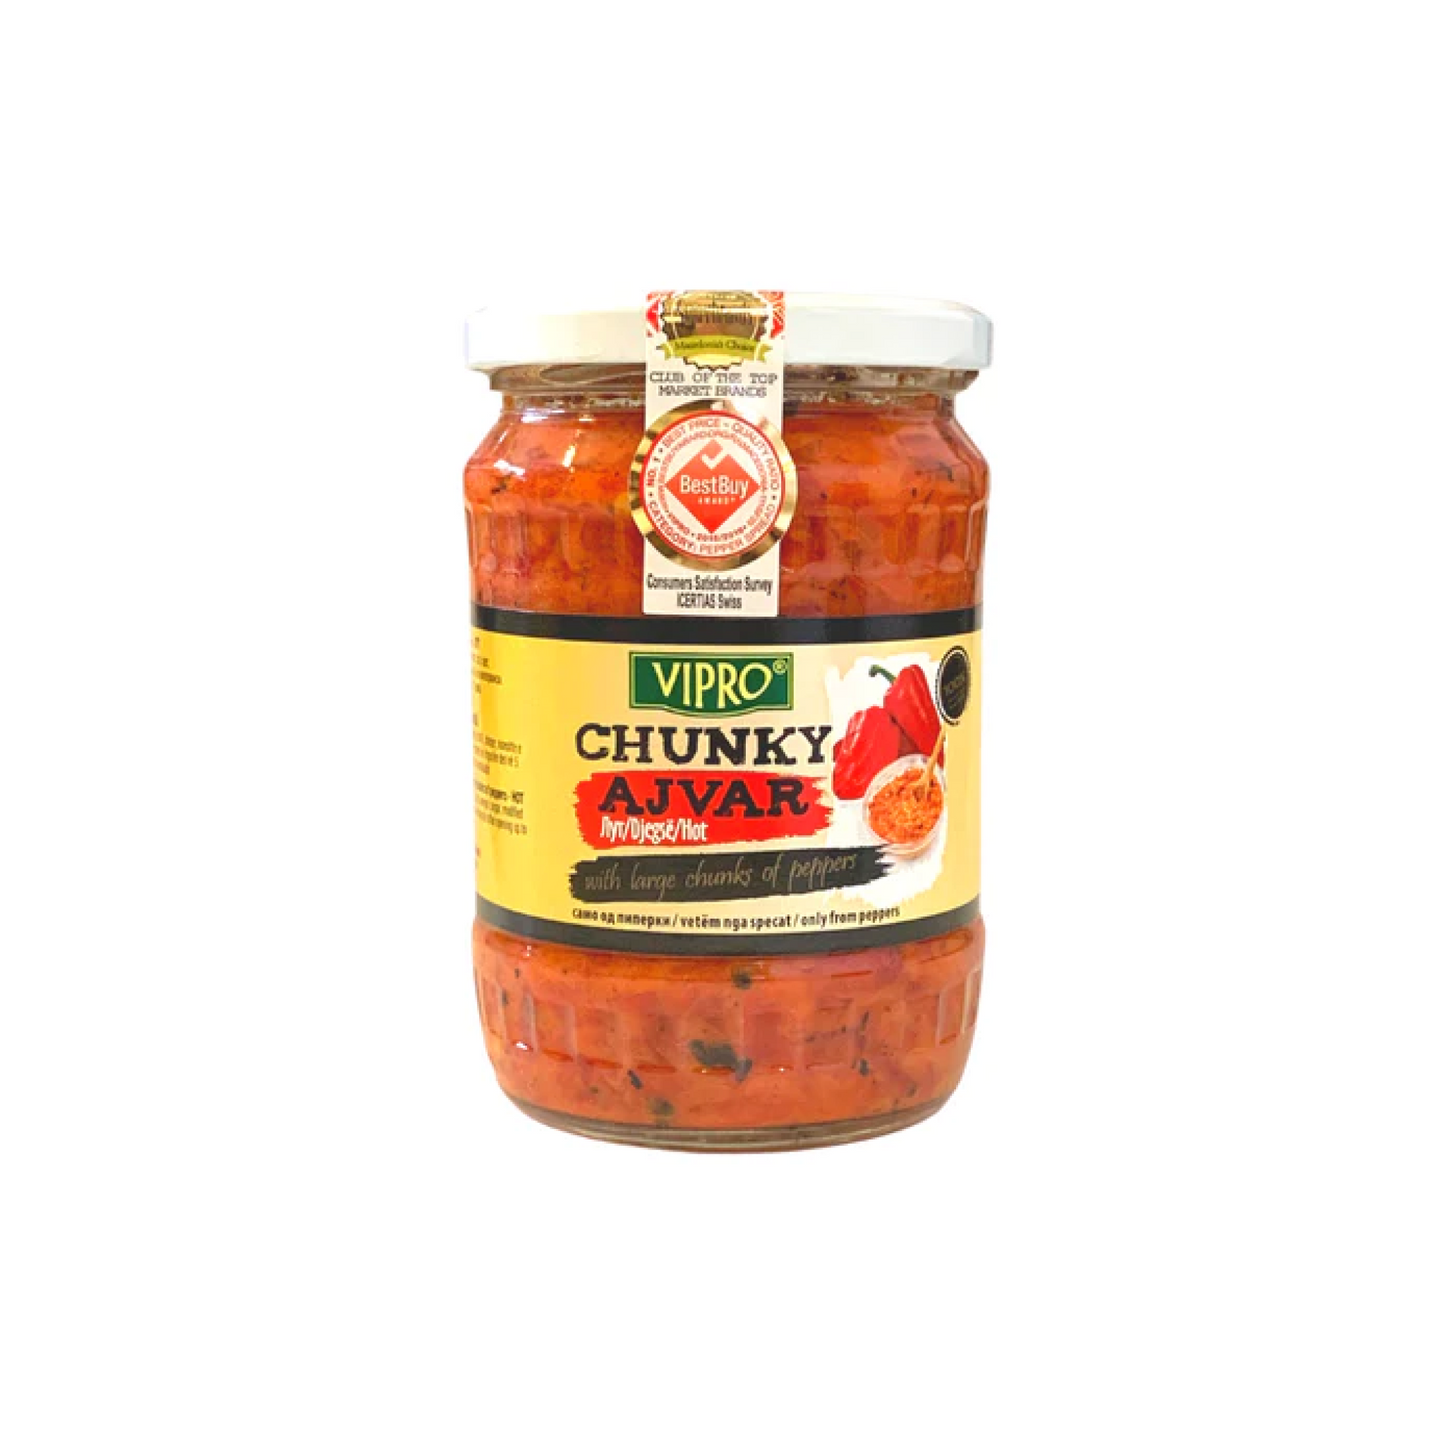 Vipro Chunky Ajvar Hot with Large Chunks of Peppers 550g